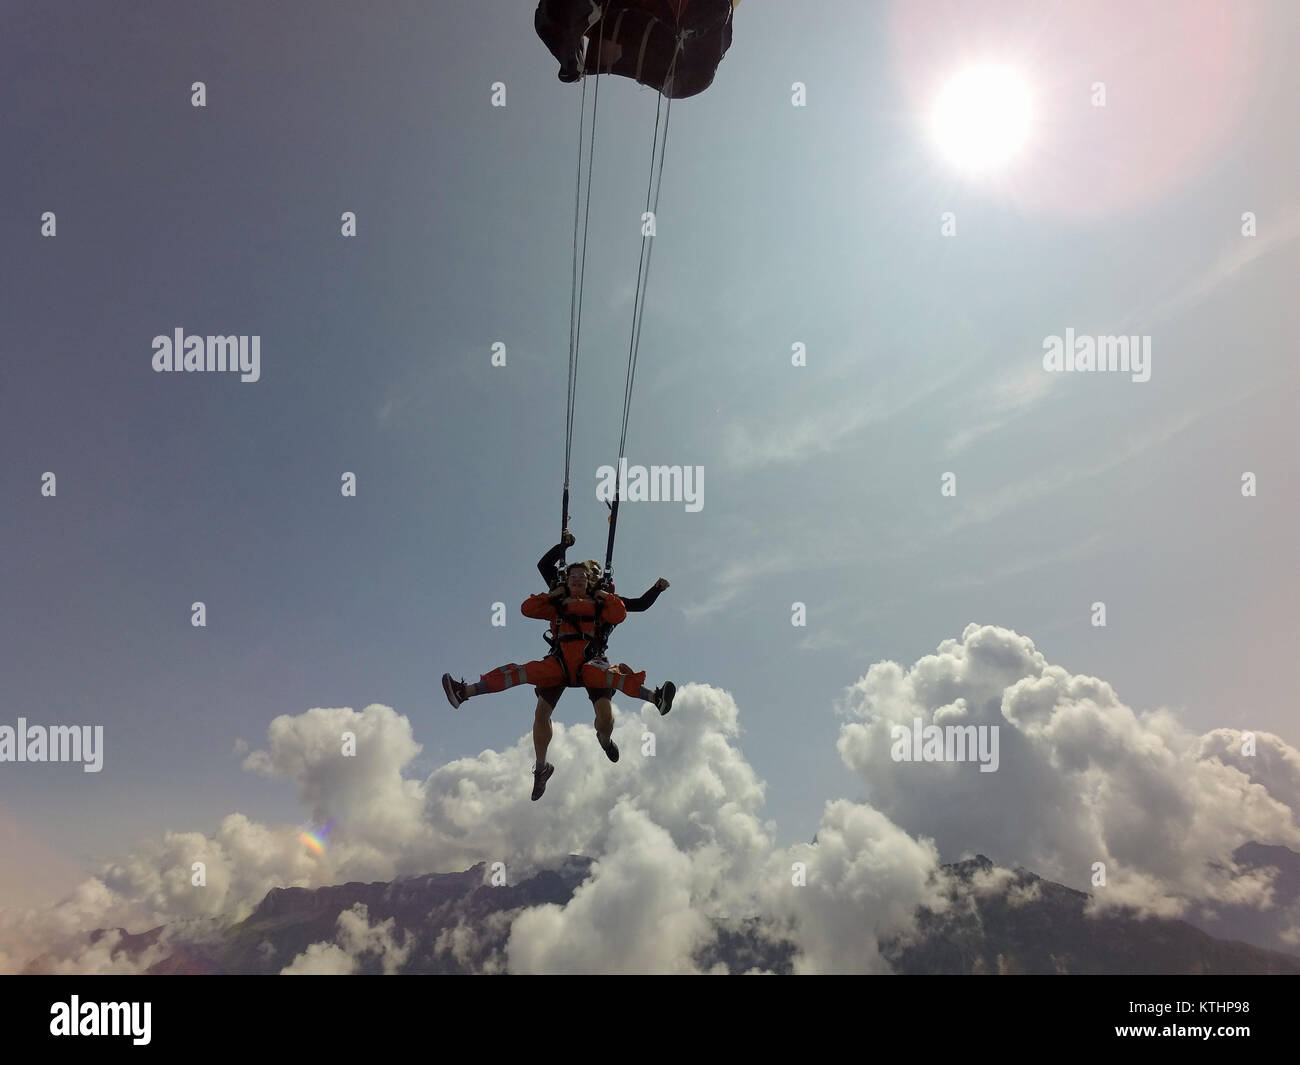 After a crazy tandem skydiving freefall, the instructor activated the parachute which stops the downward speed immediately. Stock Photo